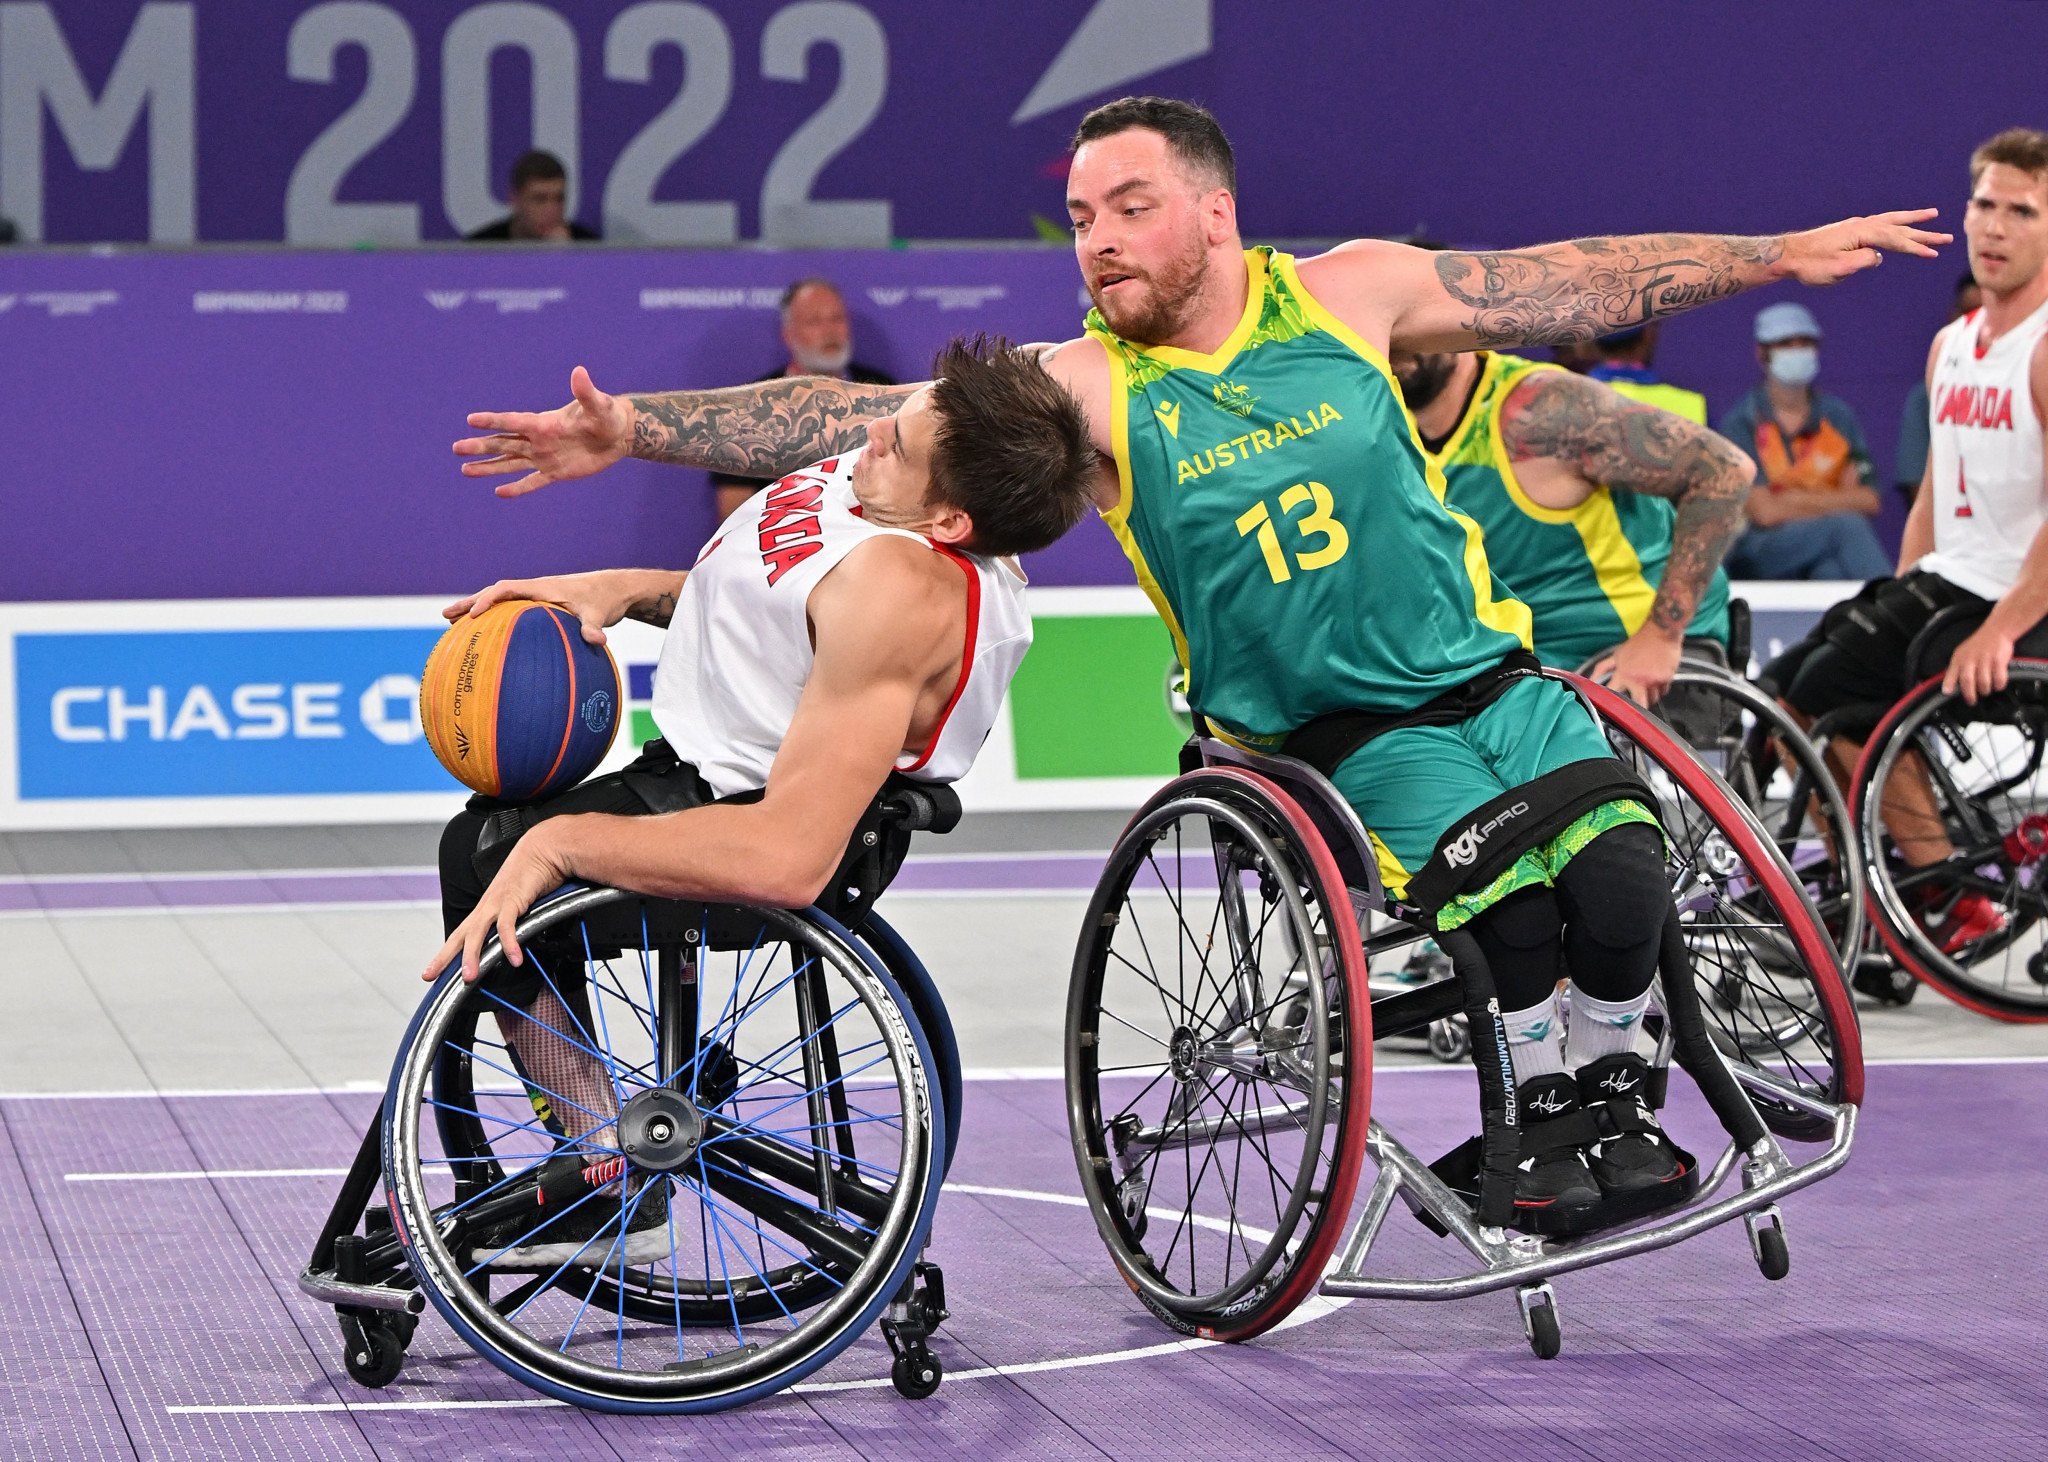 Wheelchair 3x3 basketball got underway today at Smithfield ©Getty Images